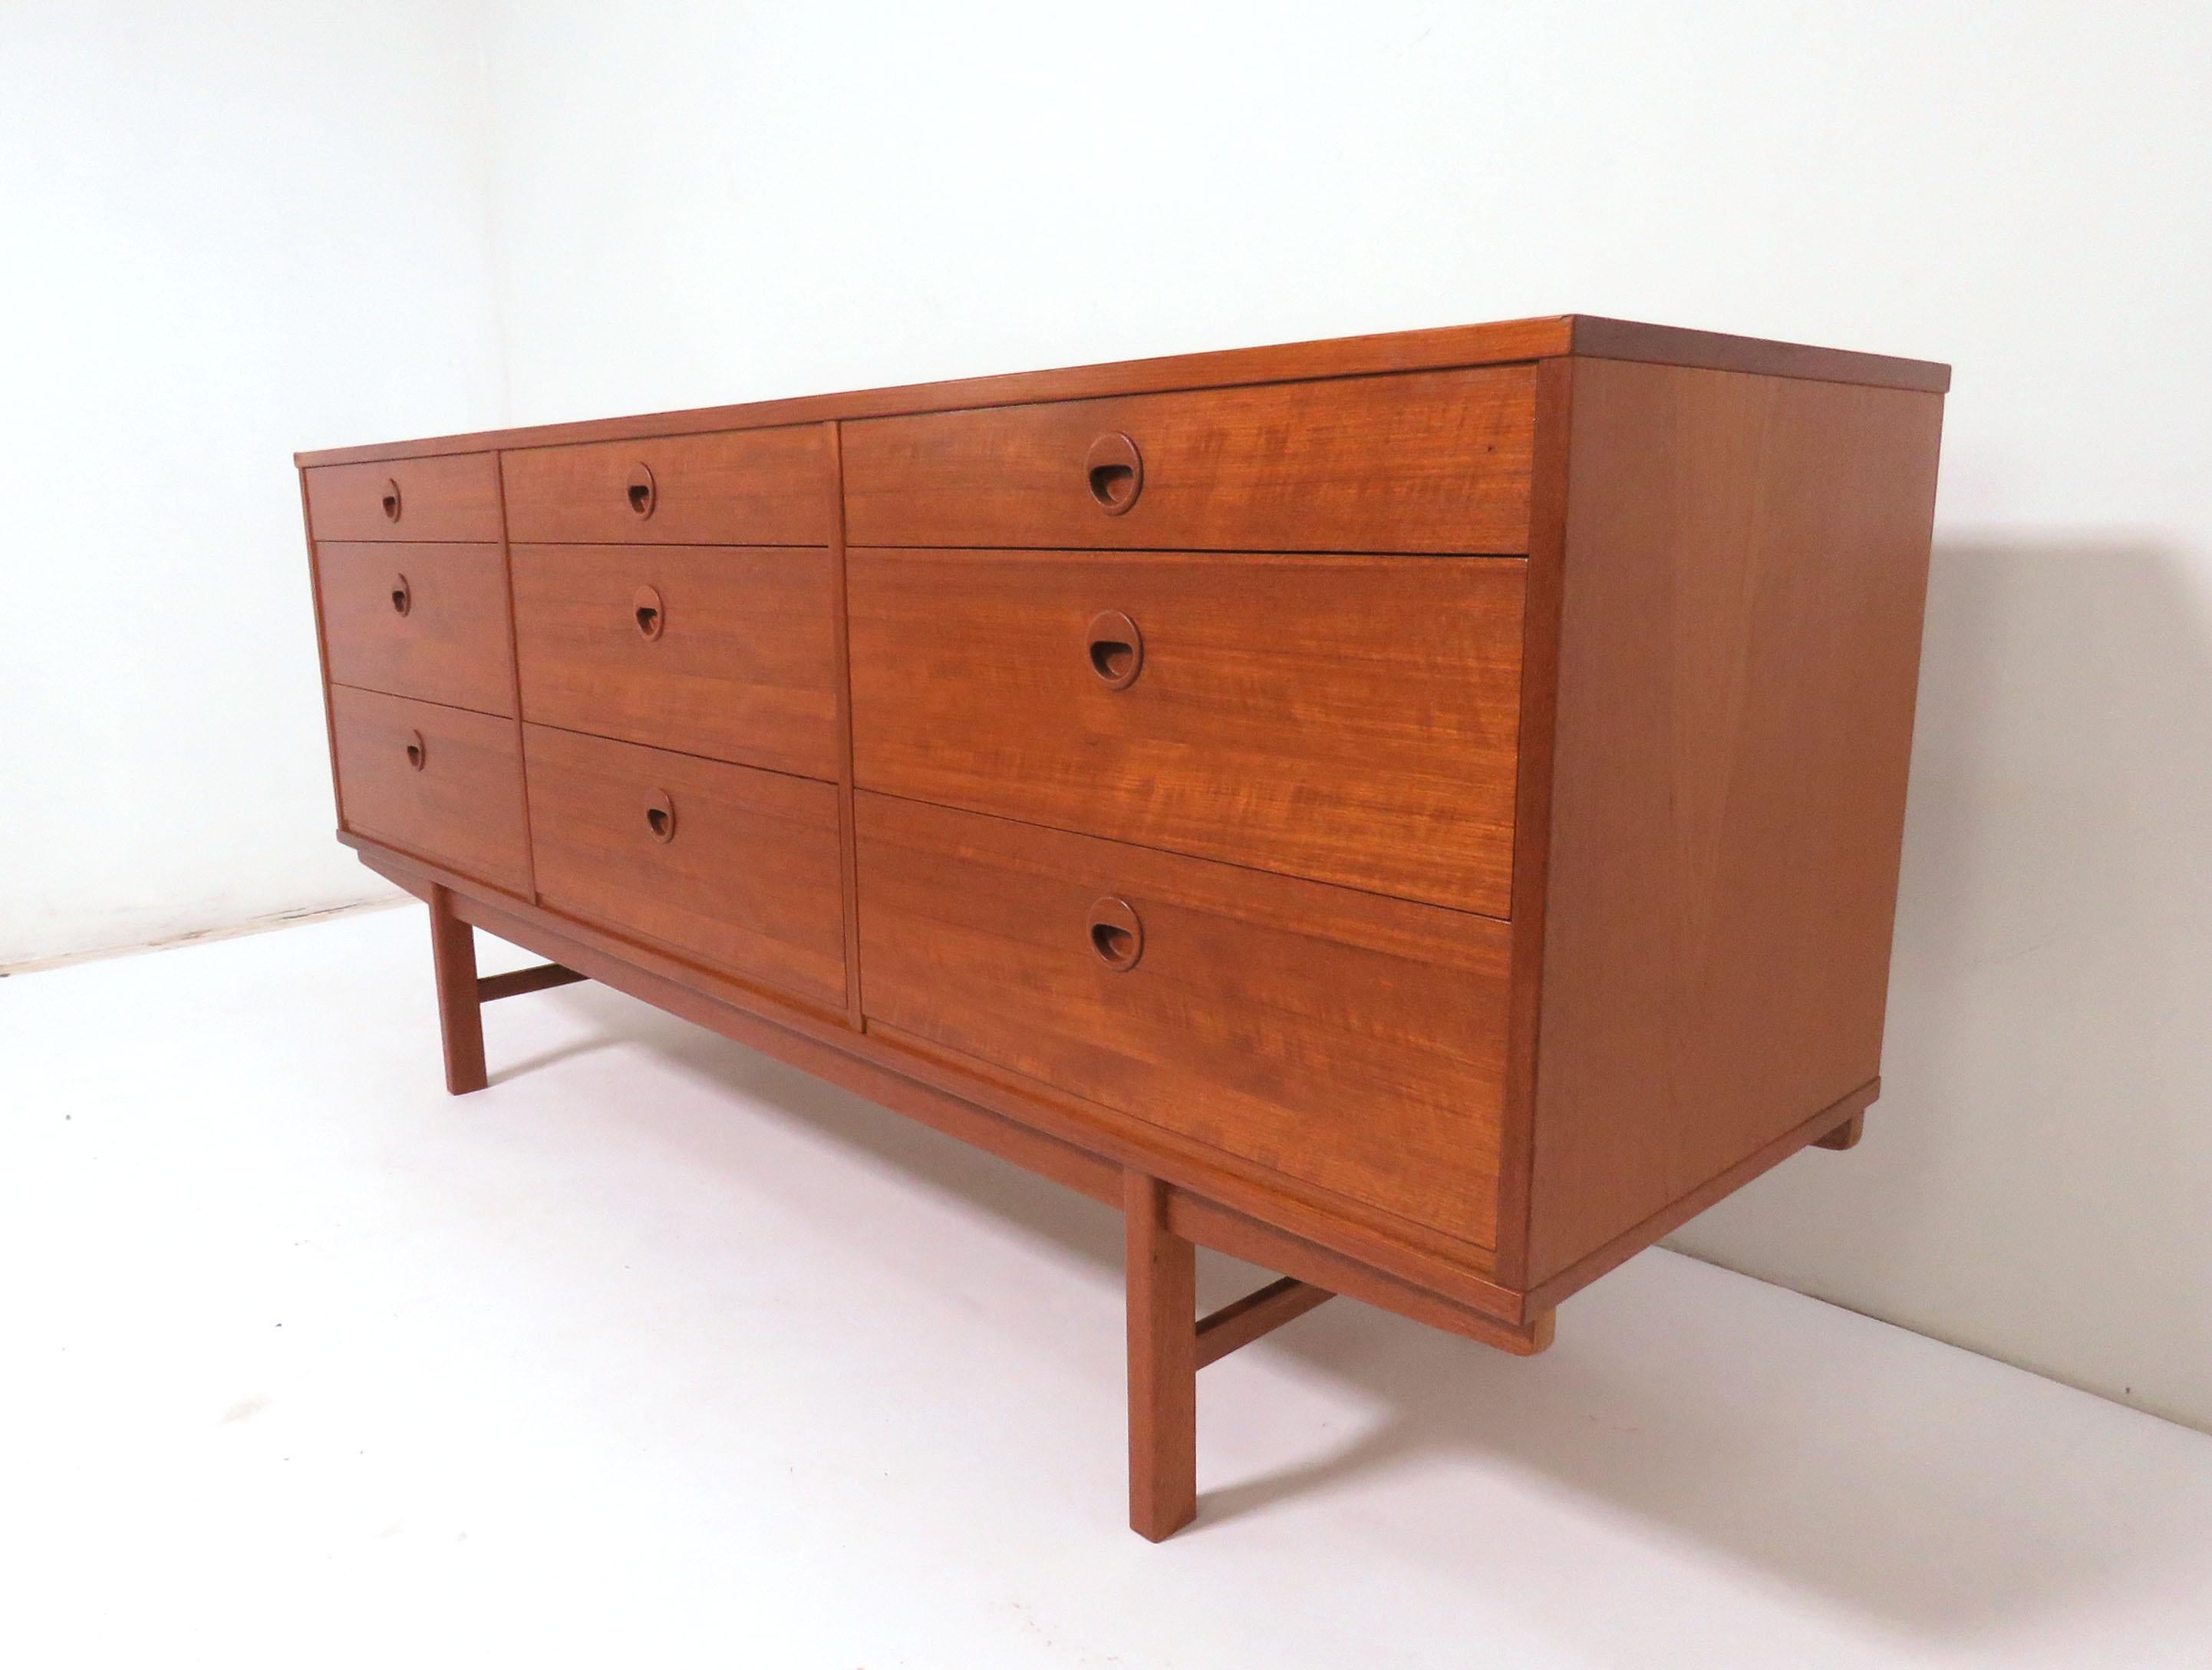 Scandinavian Modern teak buffet server / credenza with inset circular pulls by Folke Ohlsson for DUX, made in Sweden, circa early 1960s. Three shallow upper drawers at top, 3